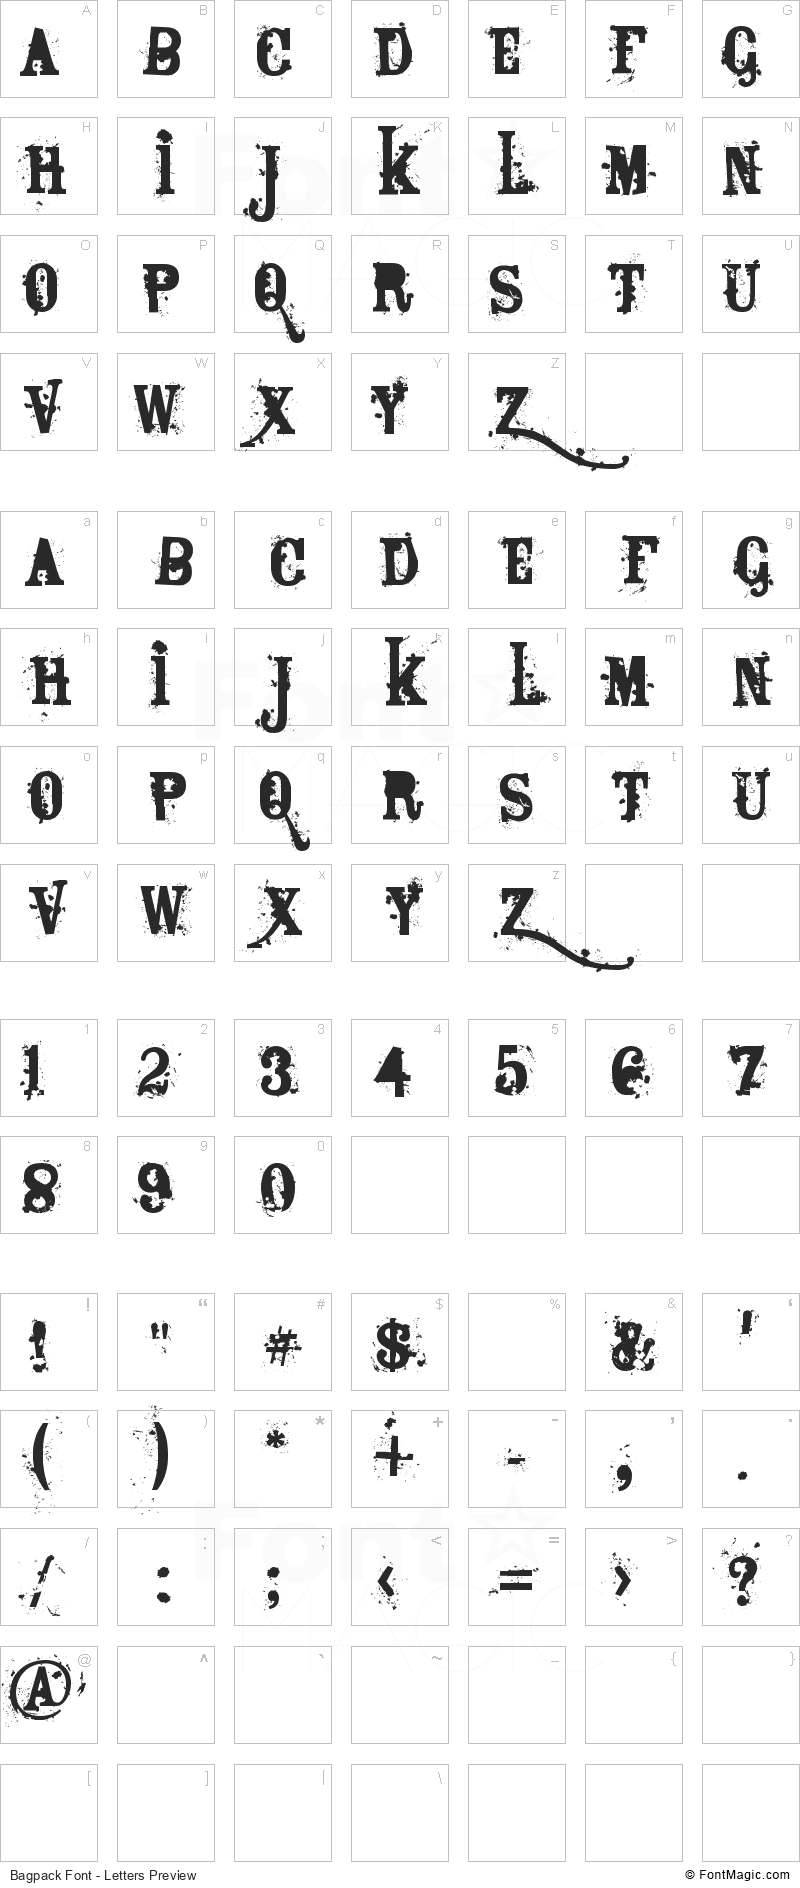 Bagpack Font - All Latters Preview Chart